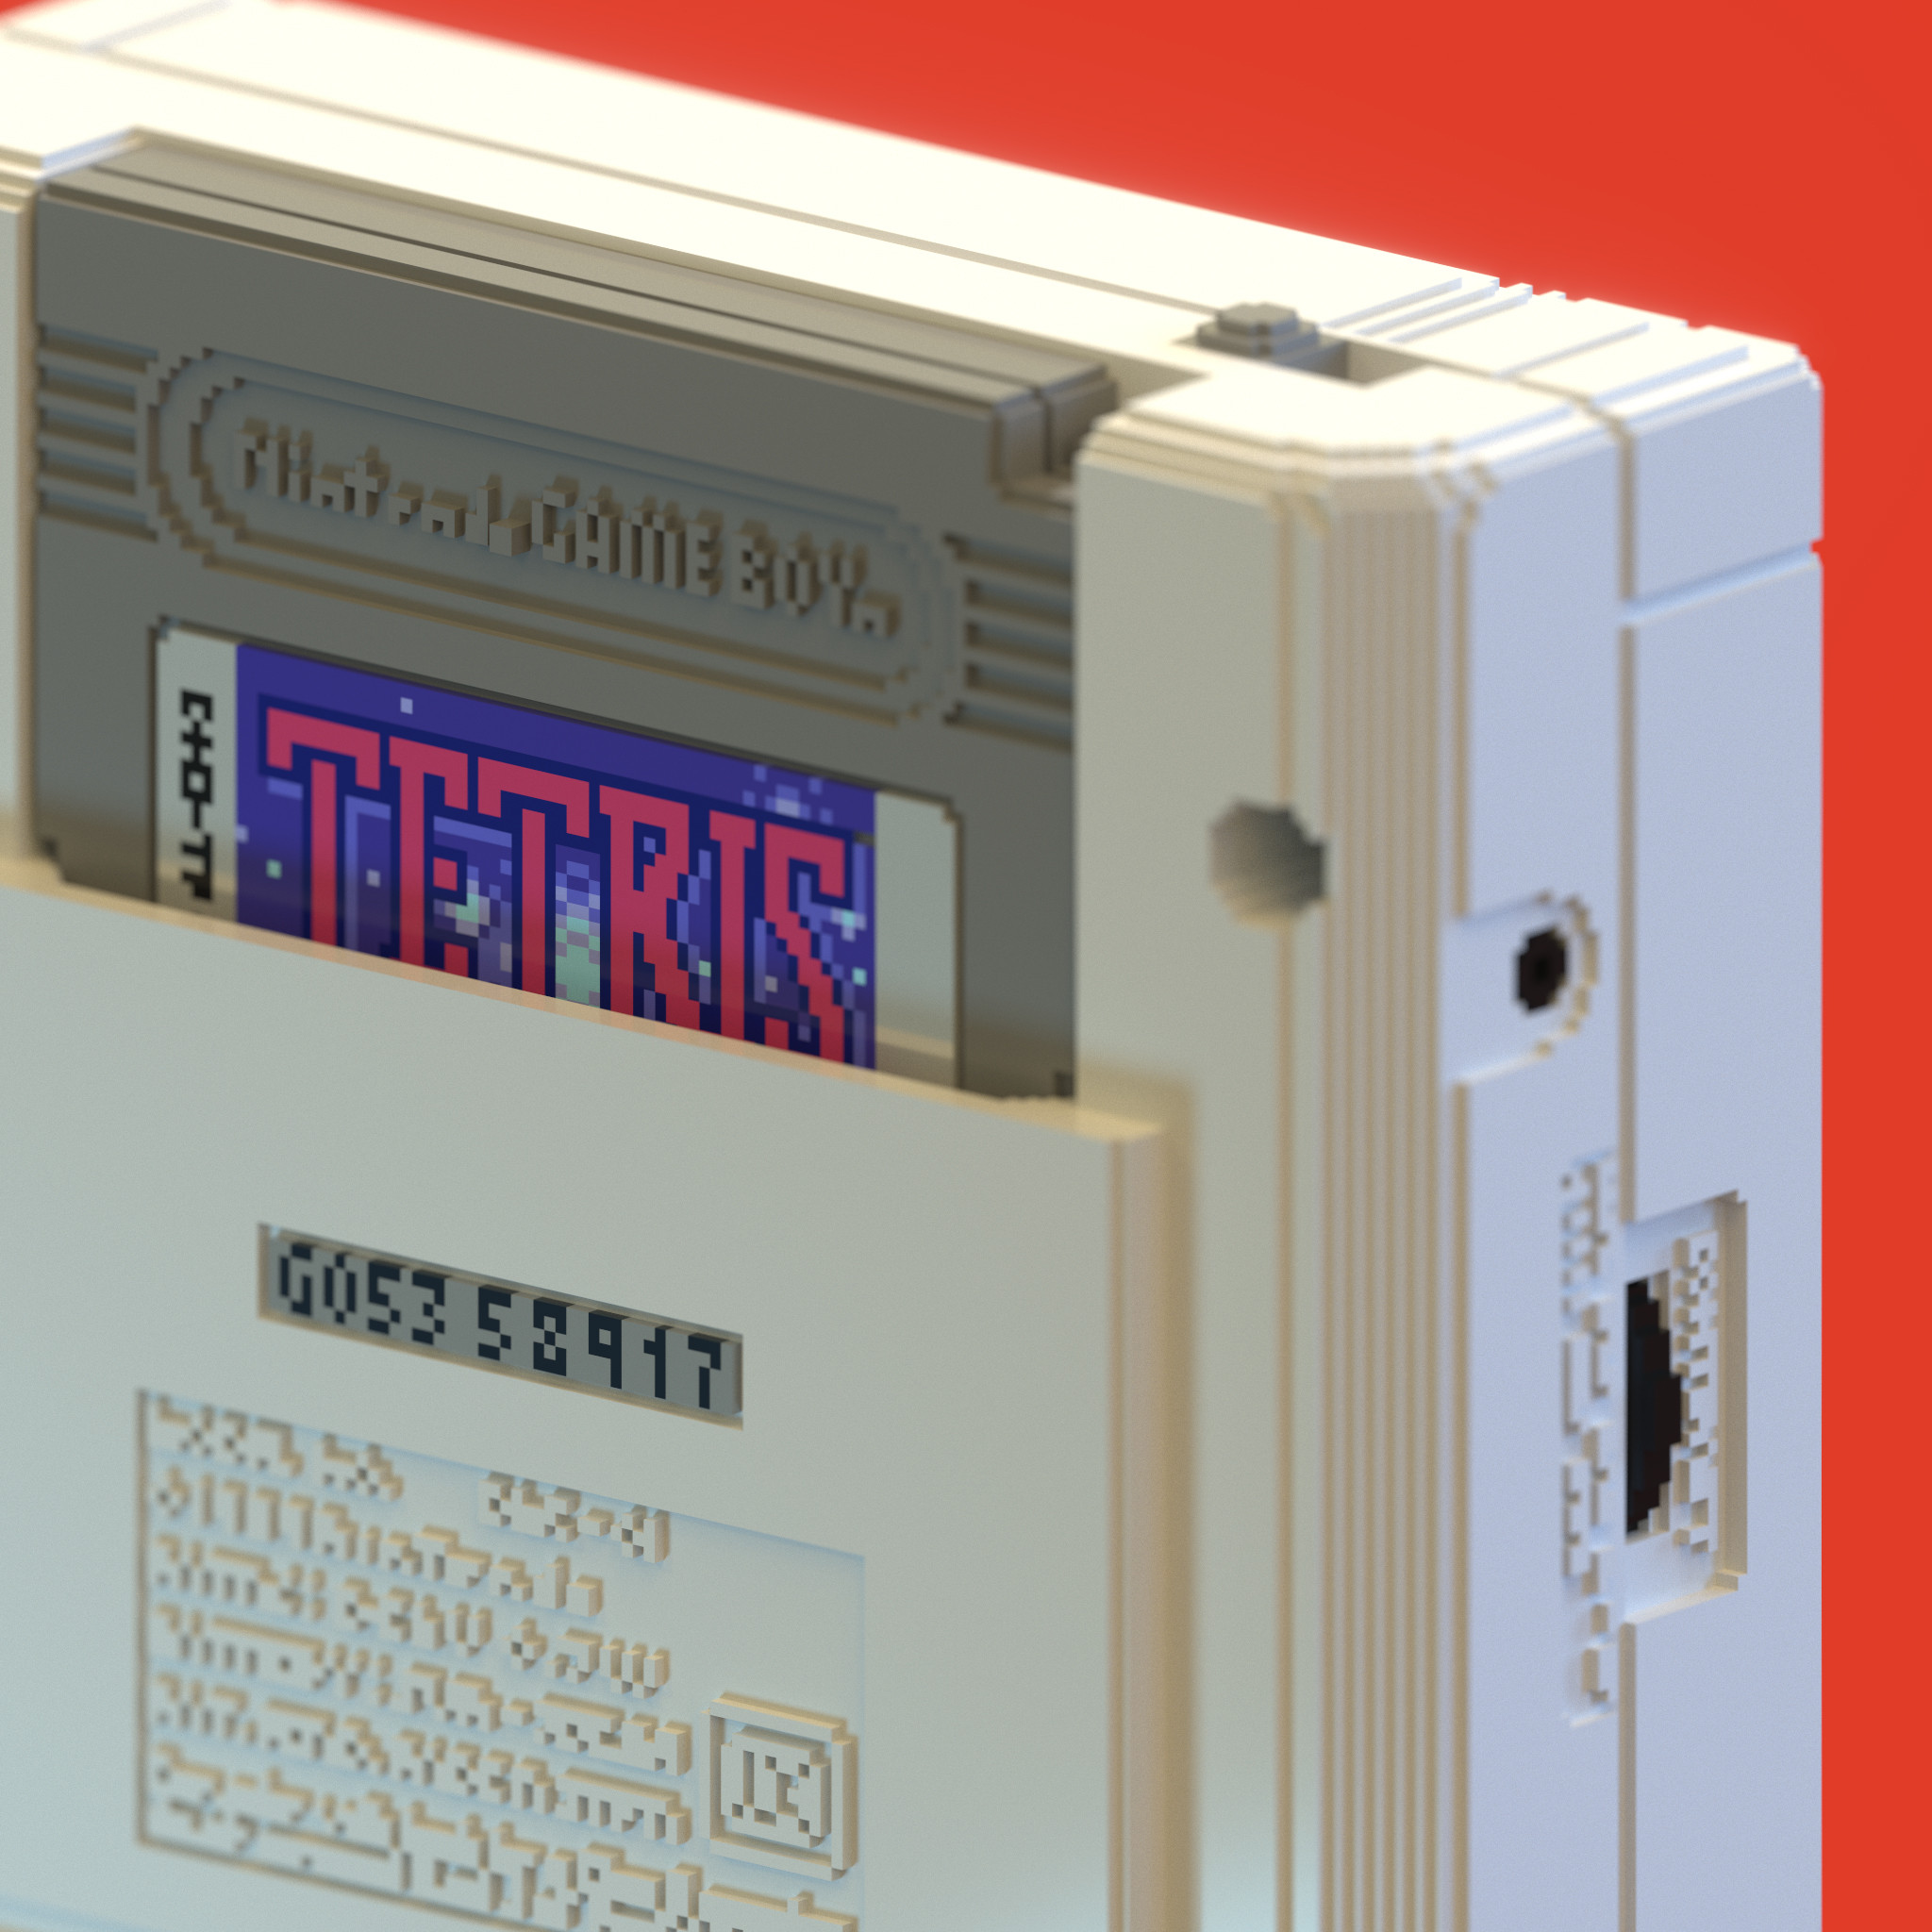 Rear-facing close up focusing on the inserted TETRIS game cartridge as well as the various surface details "molded" into the portables grey outer shell.